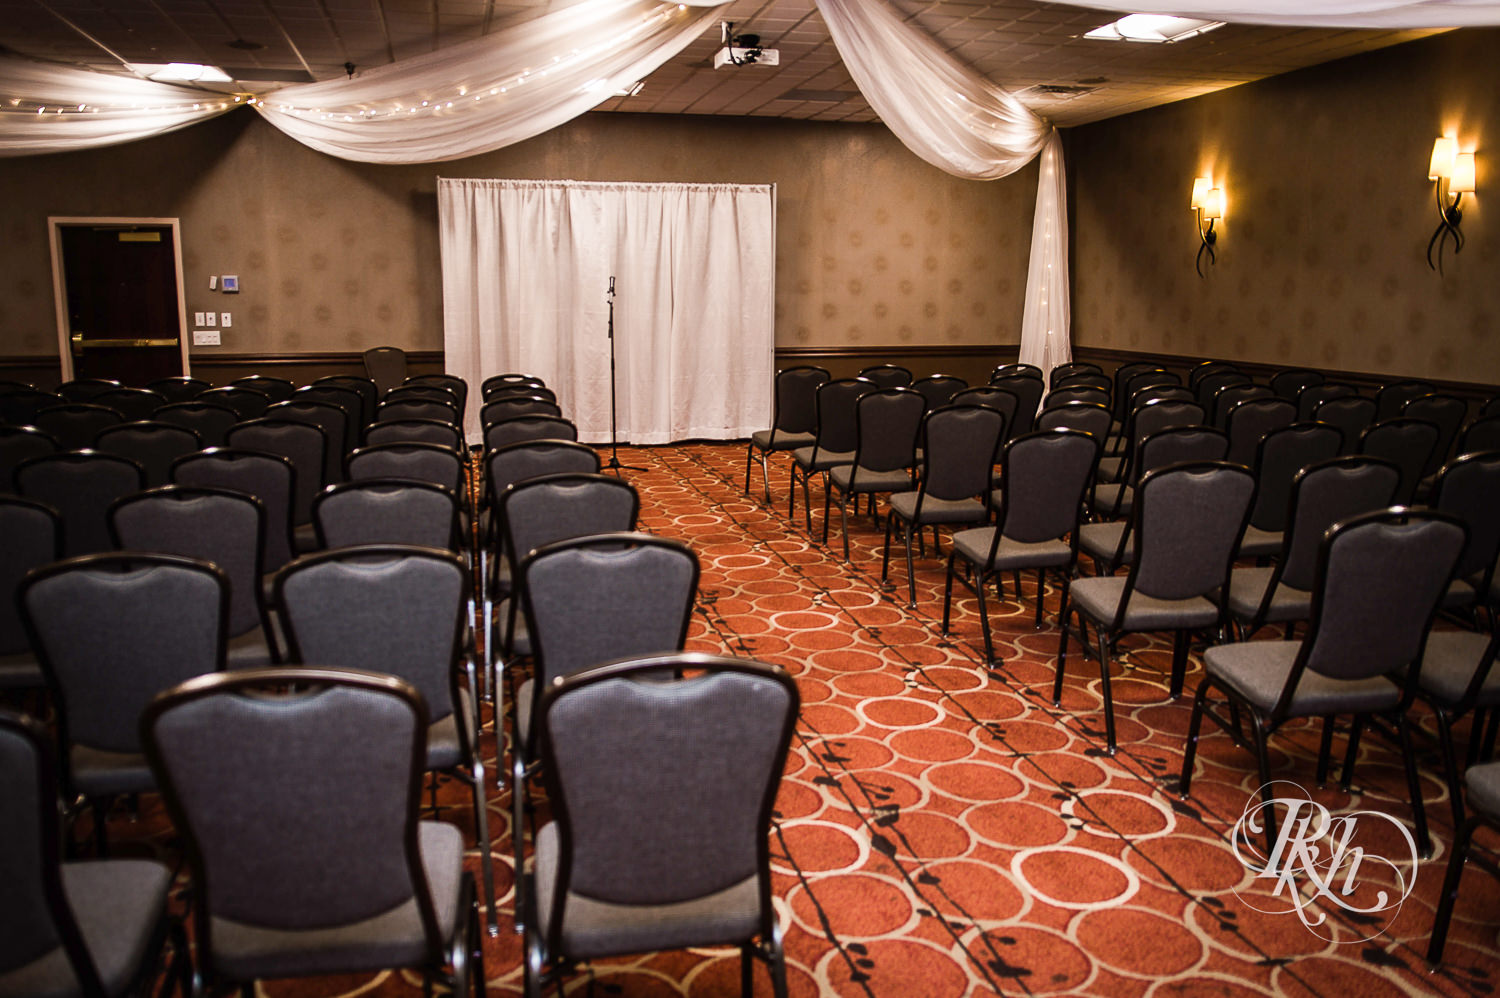 Indoor wedding setup at North Metro Event Center in Shoreview, Minnesota.